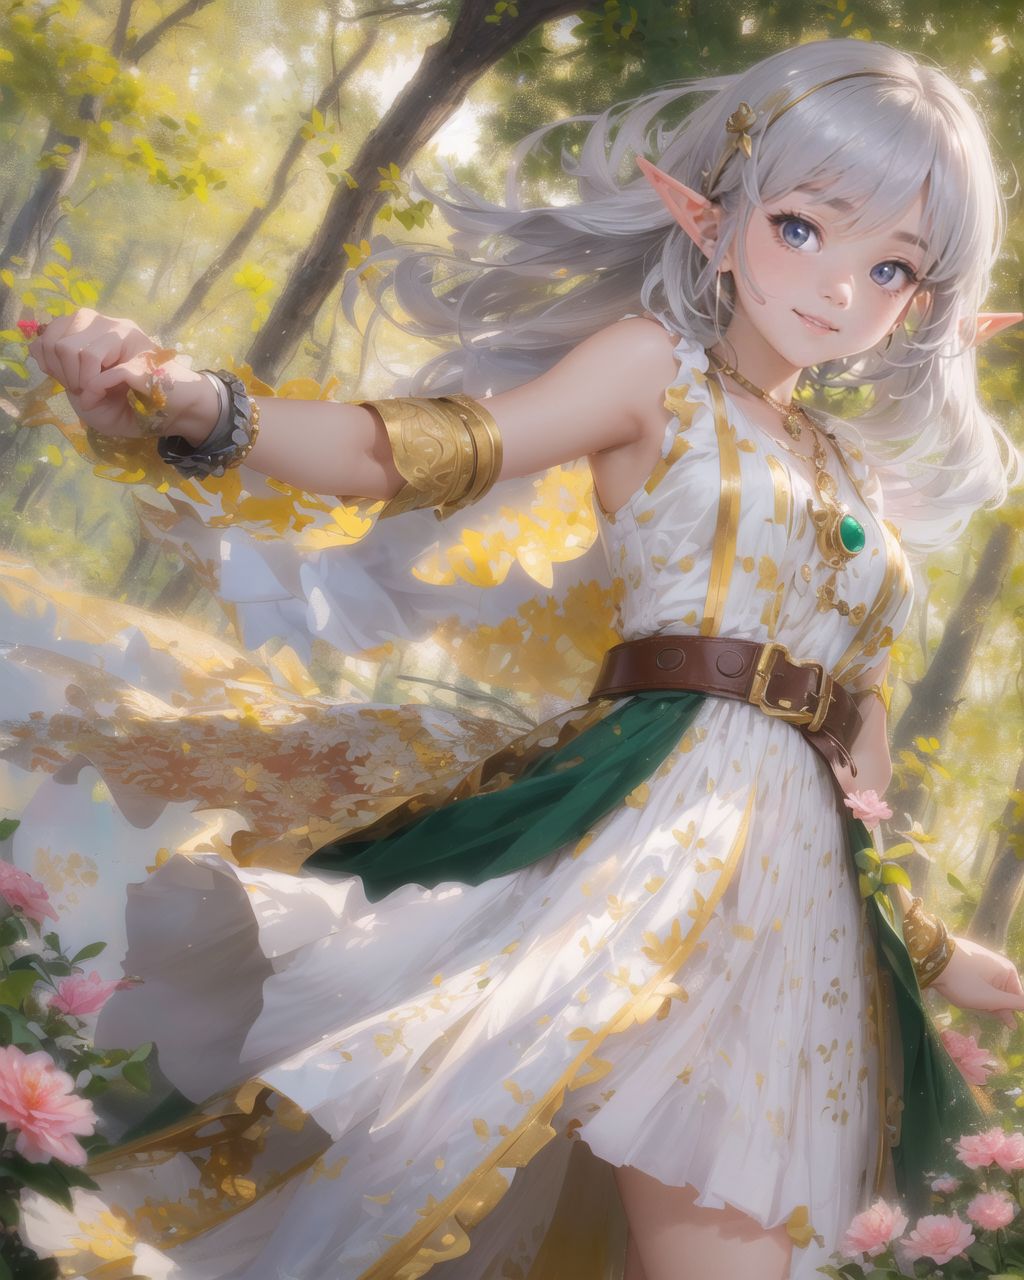 (Come on, let's paint this charming 16-year-old elf girl in detail! Represent her with more charm than flowers around her, and dedicate your time and effort to her:1.9),
She smiles, raising corners of her mouth and showing a few front teeth, with pouty lips and slightly drooping eyes epitomizing cuteness.
She is attractive 16-year-old elf warrior girl in japanese anime style, standing on mountaintop.

She stands bravely with long sword at her back.

The setting is a dense forest with towering trees reaching towards the sky. 
The morning sun shines through the thick canopy, casting a fantastic glow on the forest floor. 
Rays of sunlight filter through the leaves, creating dappled patterns of light and shadow. 
The air is filled with the fresh scent of pine and earth, and the gentle rustling of leaves is accompanied by the distant call of birds. 
A soft mist lingers near the ground, adding an ethereal quality to the scene. 
The vibrant greens of the foliage are highlighted by the golden hues of the sunlight, creating a serene and magical atmosphere,

She is poised and graceful in her luxurious armor, which gleams in twilight.
(She has idol-like kawaii face:1.5), with dark green eyes, and (silver hair in a stylish short cut with a delicate flow:1.6),
She wears silver hairpiece, green blouse with ruffled neckline, brown corset top with gold cross-stitching, dark brown underbust corset with gold buckles, emerald green cape with gold brooch shoulder clasp, leaf-shaped shoulder straps with gold trim, green fabric wrist cuffs, a forest green multi-layered skirt with gold trim, leather utility belt with a pouch, brown folding boots, and contrasting dark and light green accessories.
She also has a necklace, bracelet, and an intricate gold armband on her upper arm.

Her stance is powerful and brave, yet youthful and graceful, embodying ideal blend of innocence and glamour.
low angle emphasizes her cuteness and highlights the delicate textures of her hair and clothing.
Natural light casts soft shadows and highlights the youthful contours of her face, bringing her into sharp focus.
The shallow depth of field of the 50mm f/1.2 lens creates a beautiful depth-of-field blur that keeps her face in focus, with high-resolution, detailed graphics, vibrant colors, and professional quality.
Ultra-high resolution captures every detail, from individual strands of hair to the intricate fabric of her costume.
Professional clarity and contrast bring vibrant colors to life.